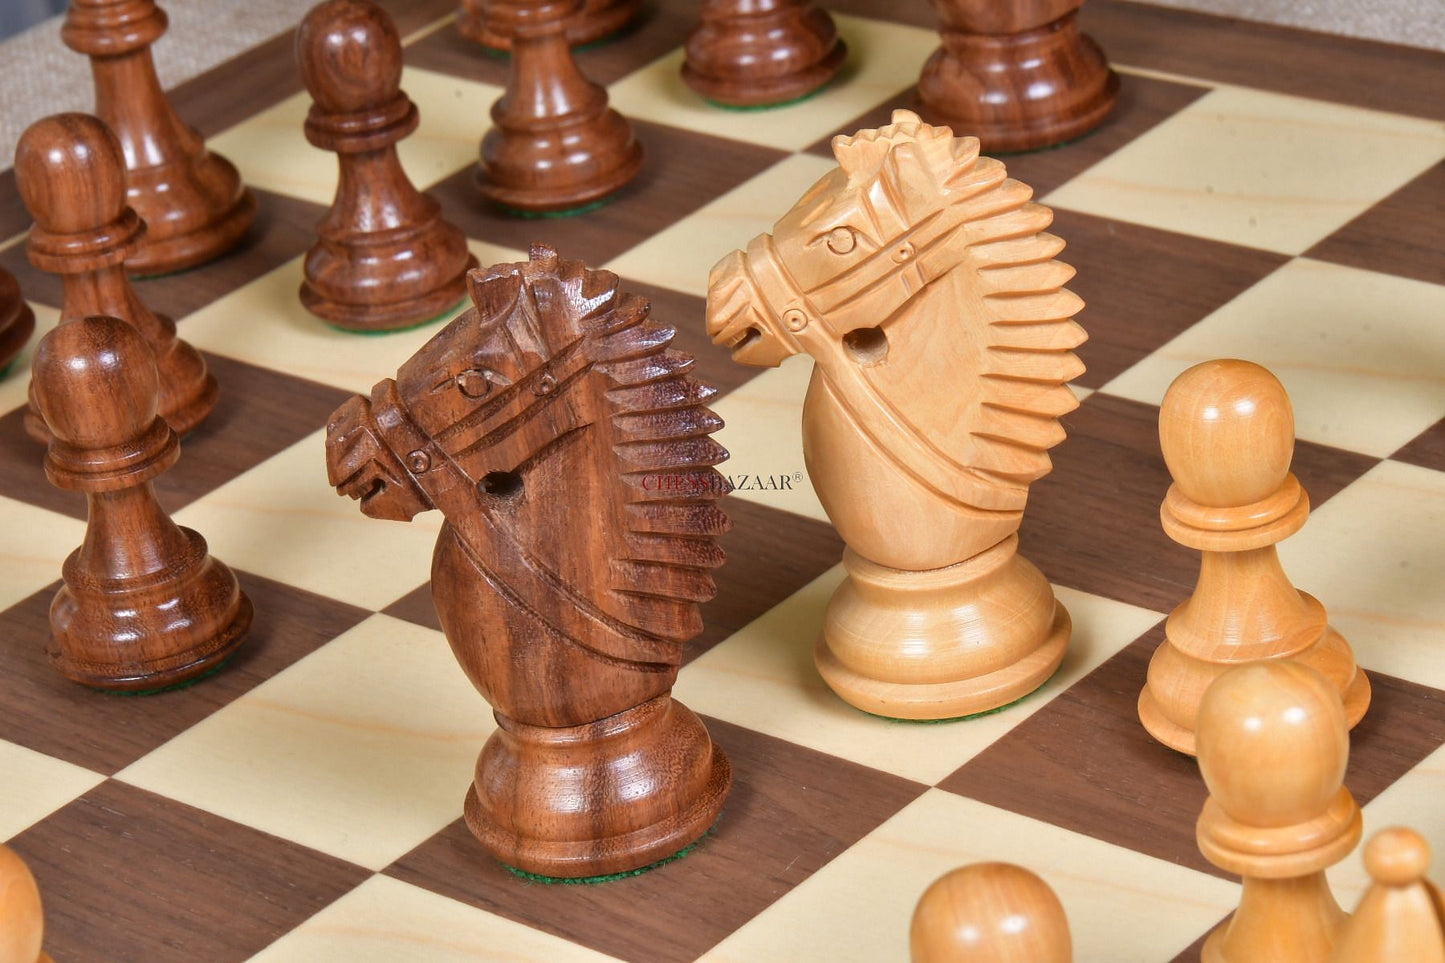 The Bridle Knight Series Wooden Chess Pieces in Sheesham & Box Wood - 4.0" King